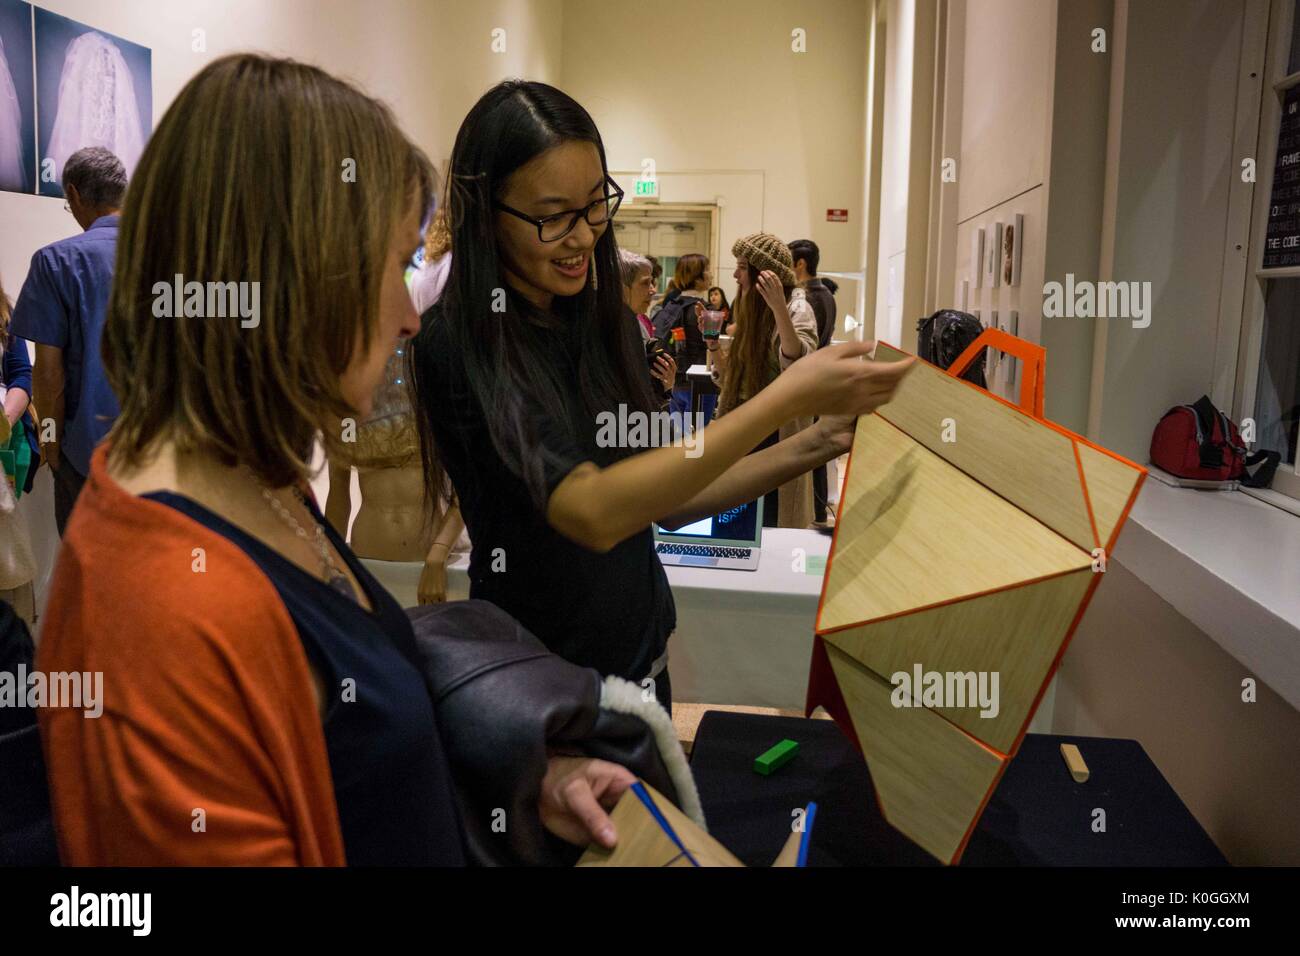 Two attendees look closely at a piece of artwork, the younger girl is holding up the artwork and observing it at the Unravel the Code Opening at The Johns Hopkins University Sheridan Libraries, 2016. Courtesy Eric Chen. Stock Photo